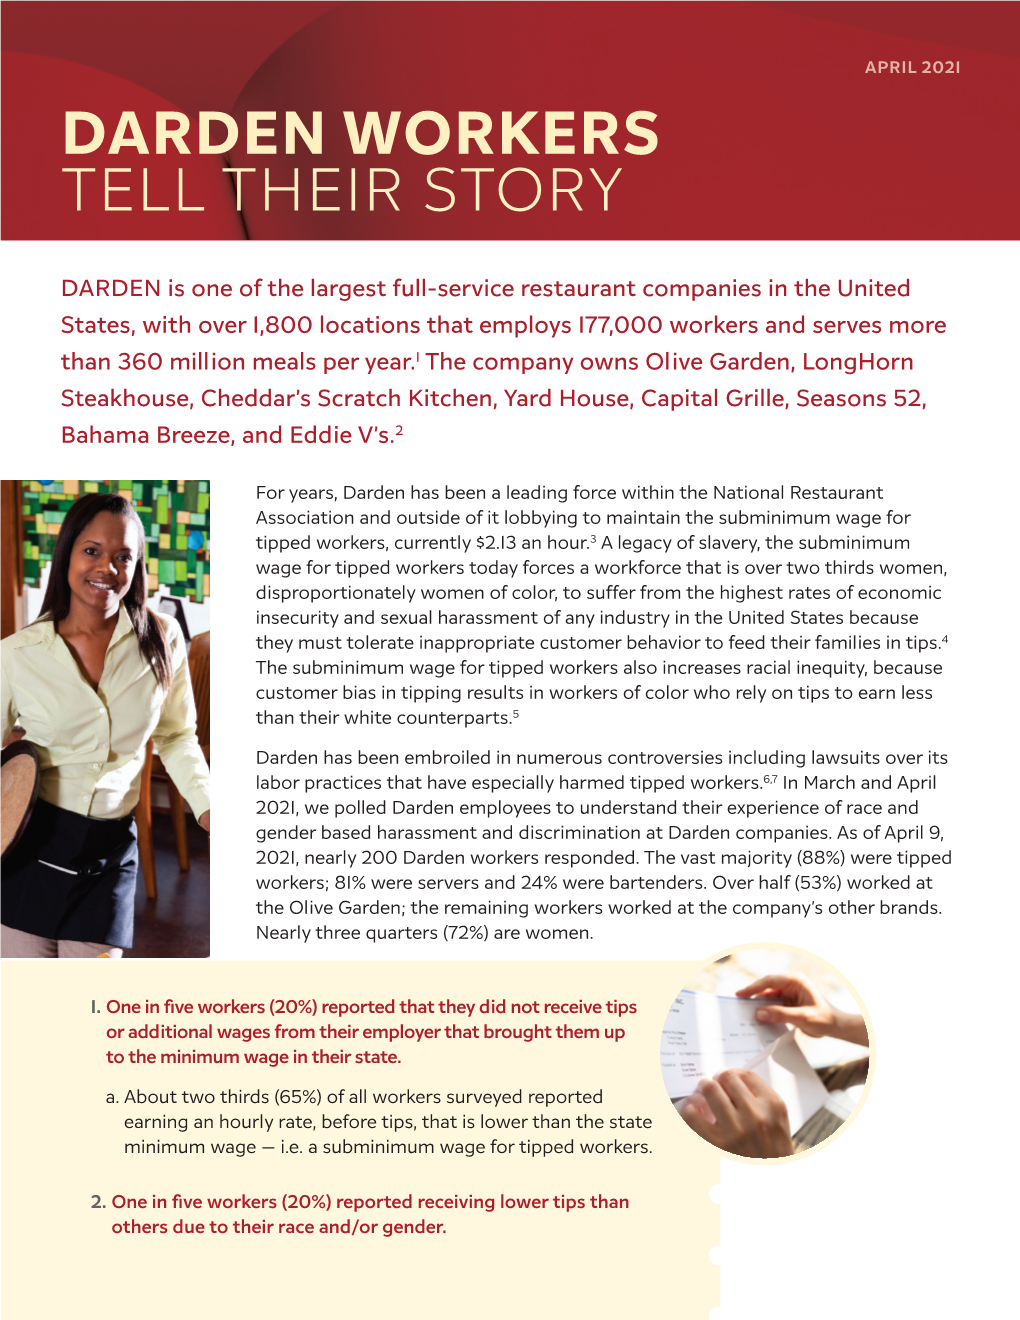 Darden Workers Tell Their Story